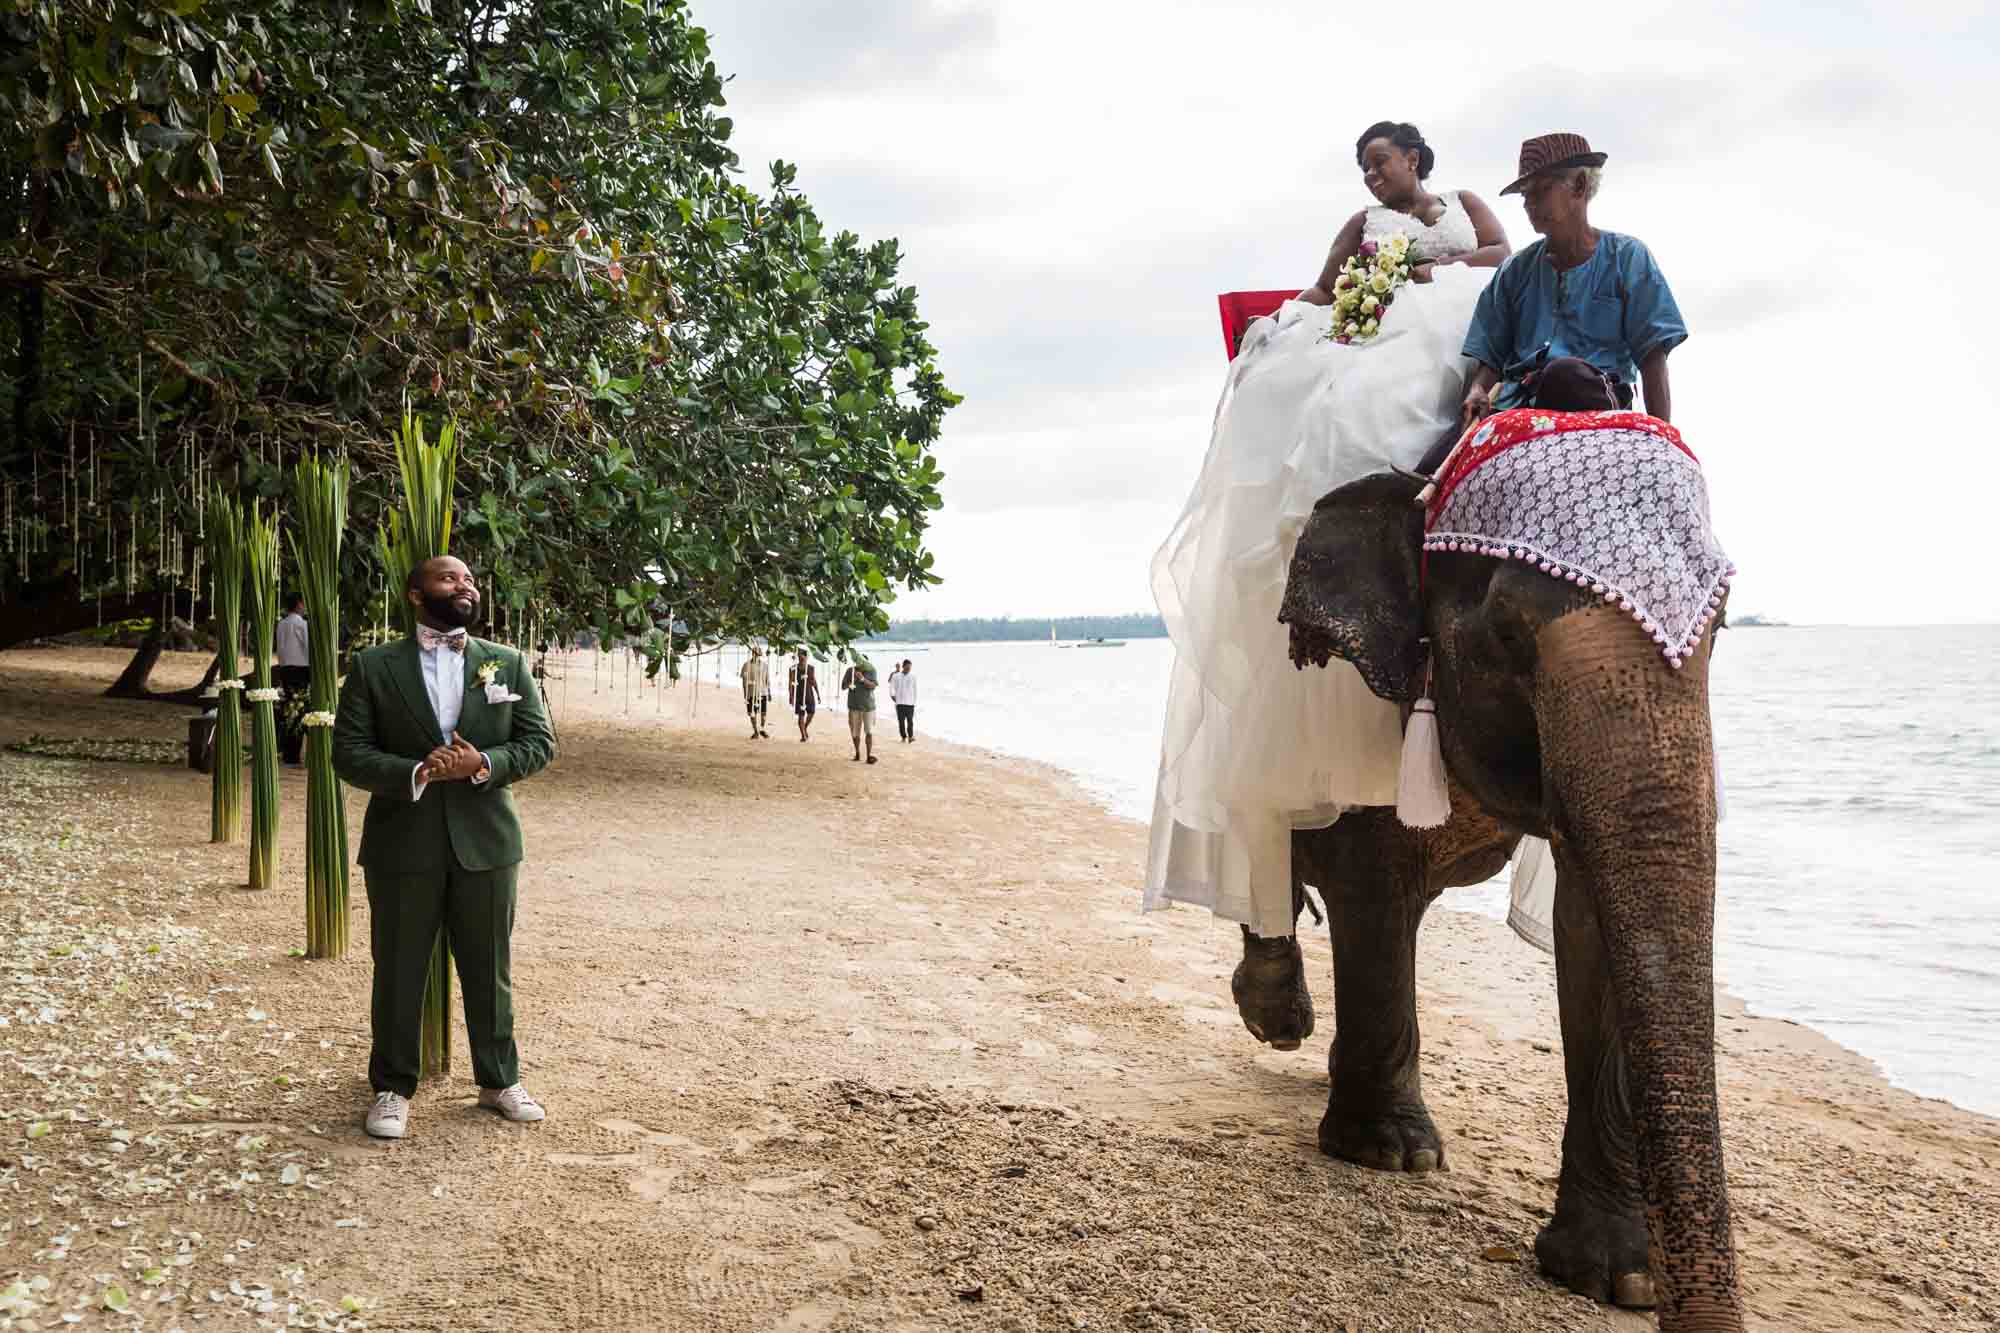 Bride and groom on the beach with elephant for an article on destination wedding planning tips